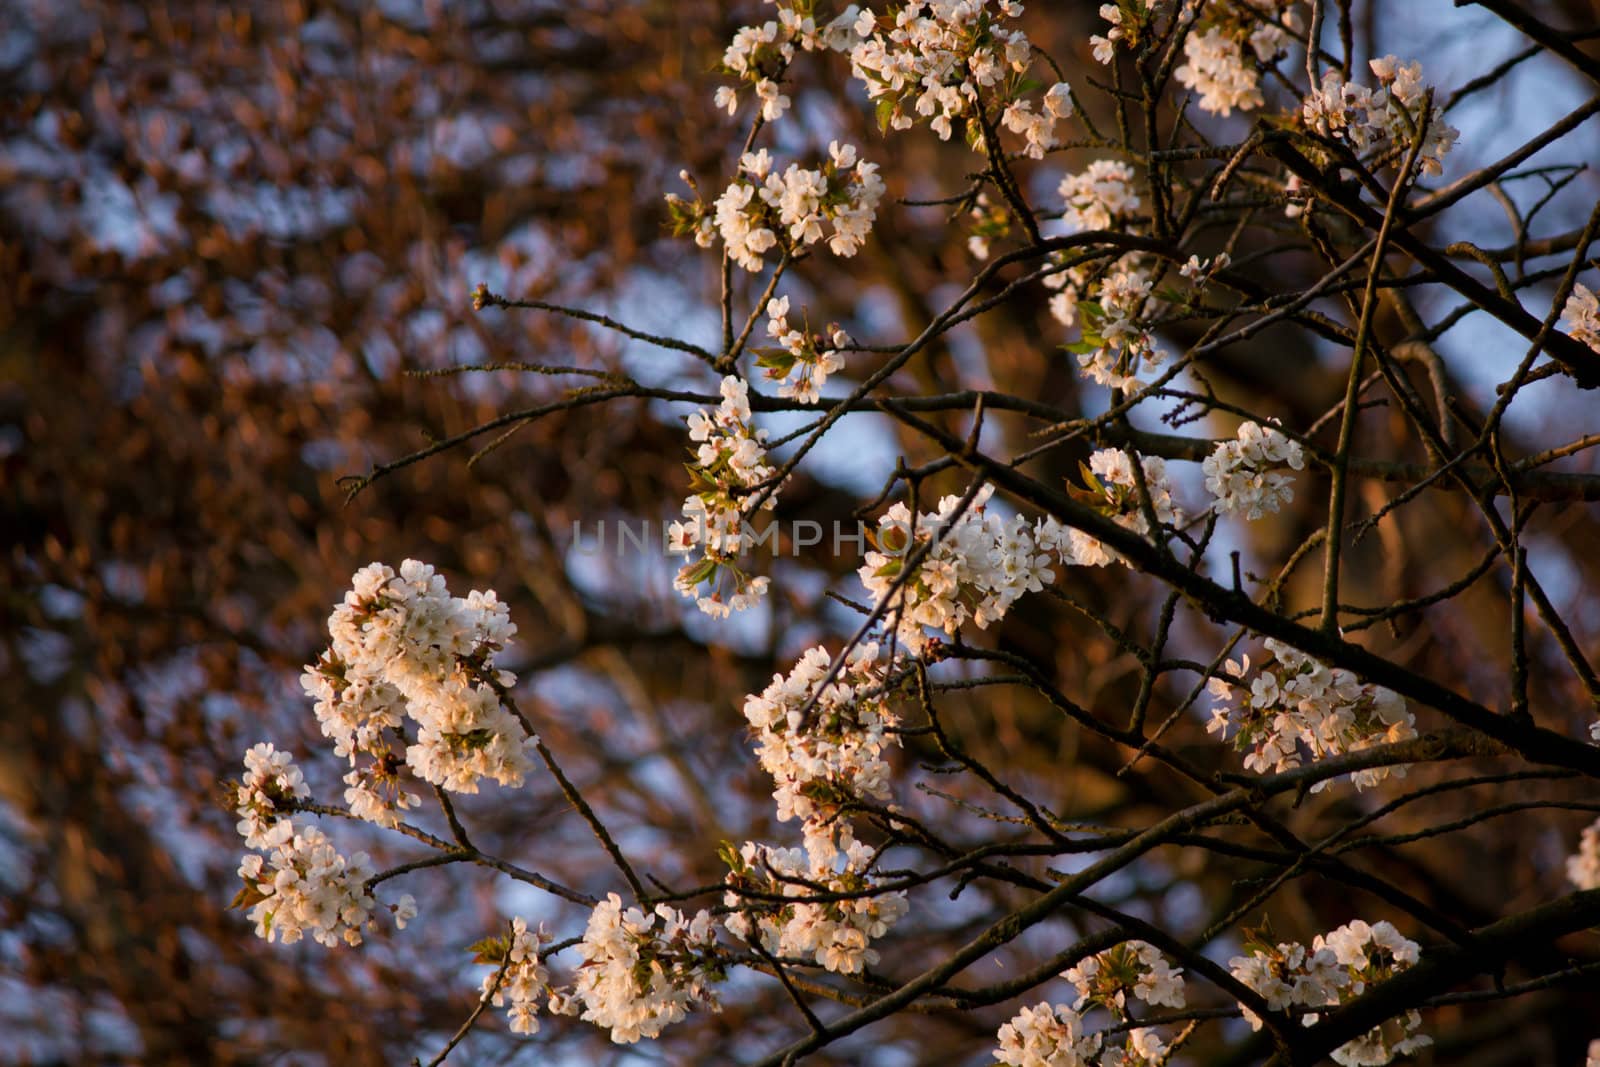 Cherry blossoms on a tree in spring